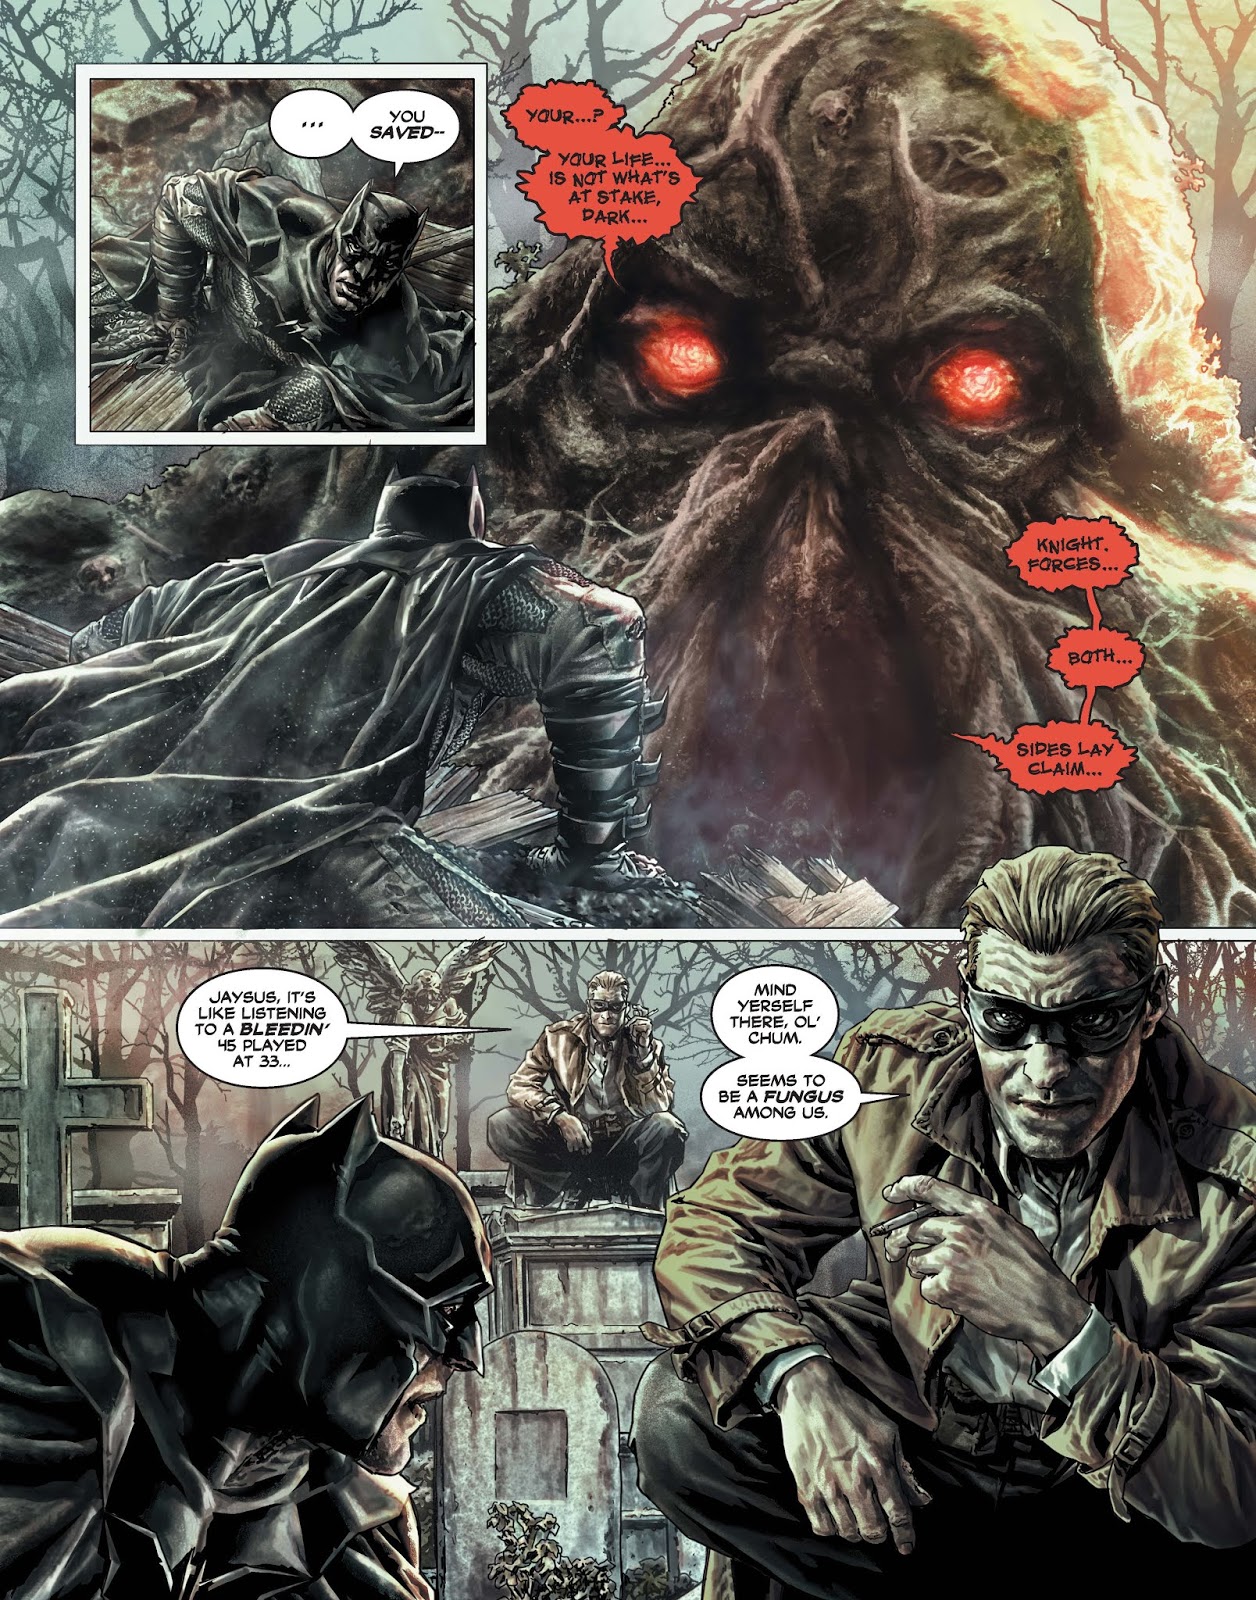 Weird Science DC Comics: Batman: Damned #3 Review and Spoilers